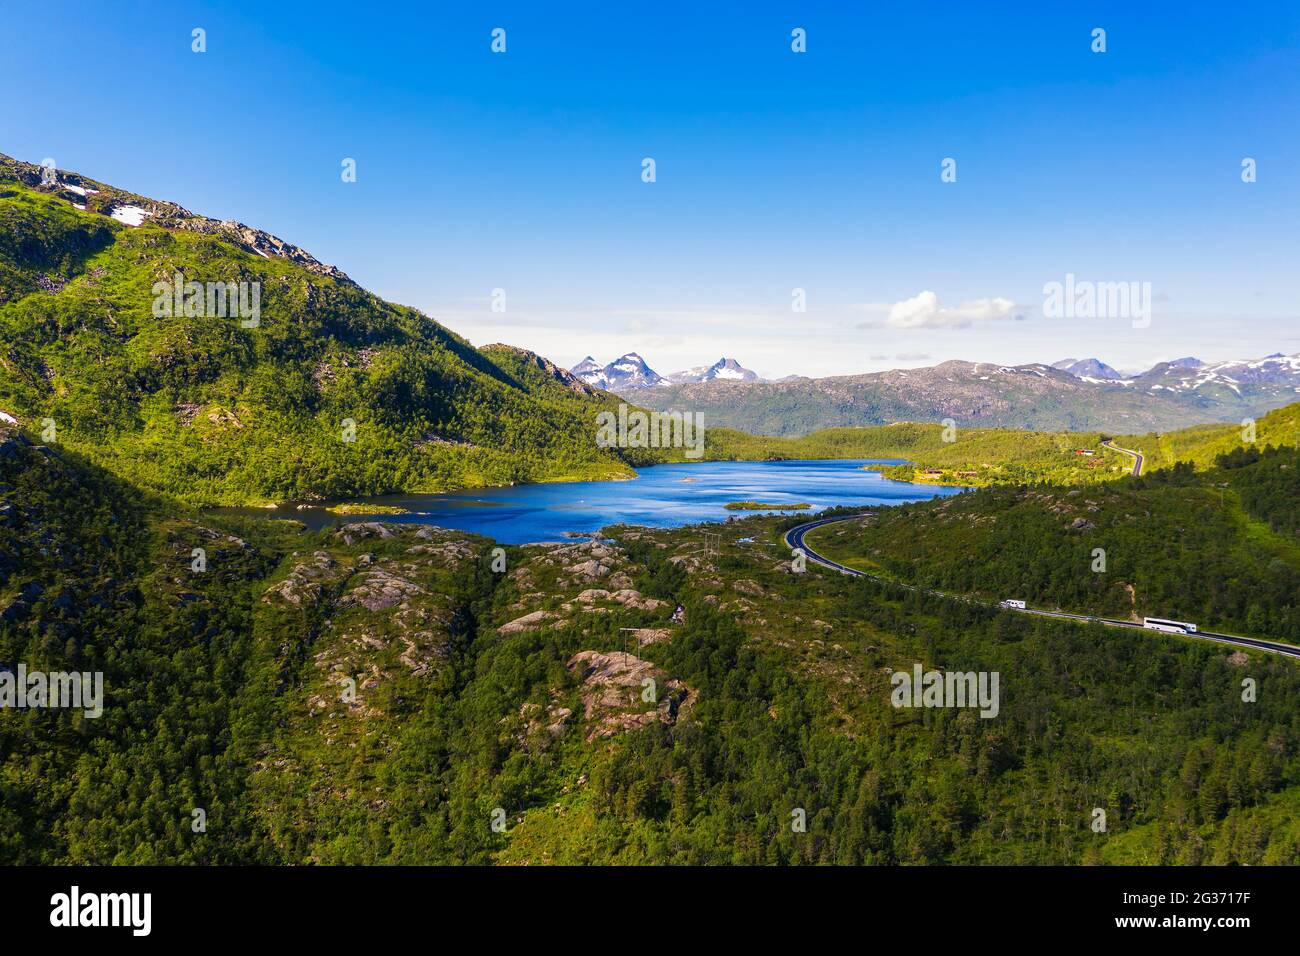 Aerial view of forests and a lake in Lofoten Islands, Norway Stock Photo